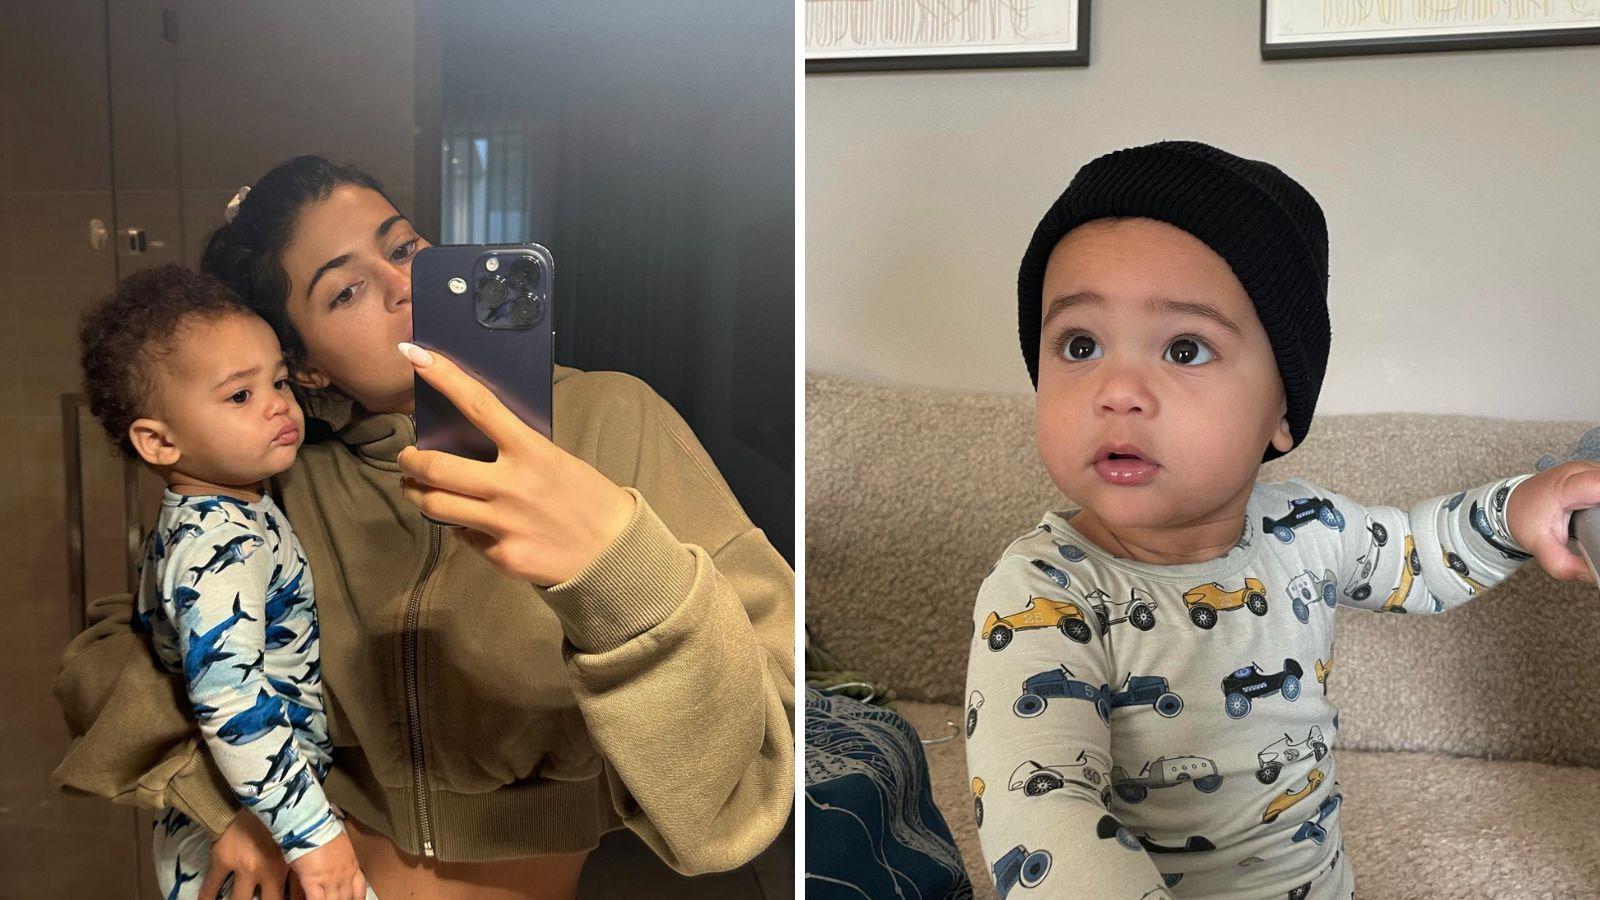 One photo of Kylie Jenner and her son, another photo of her son alone